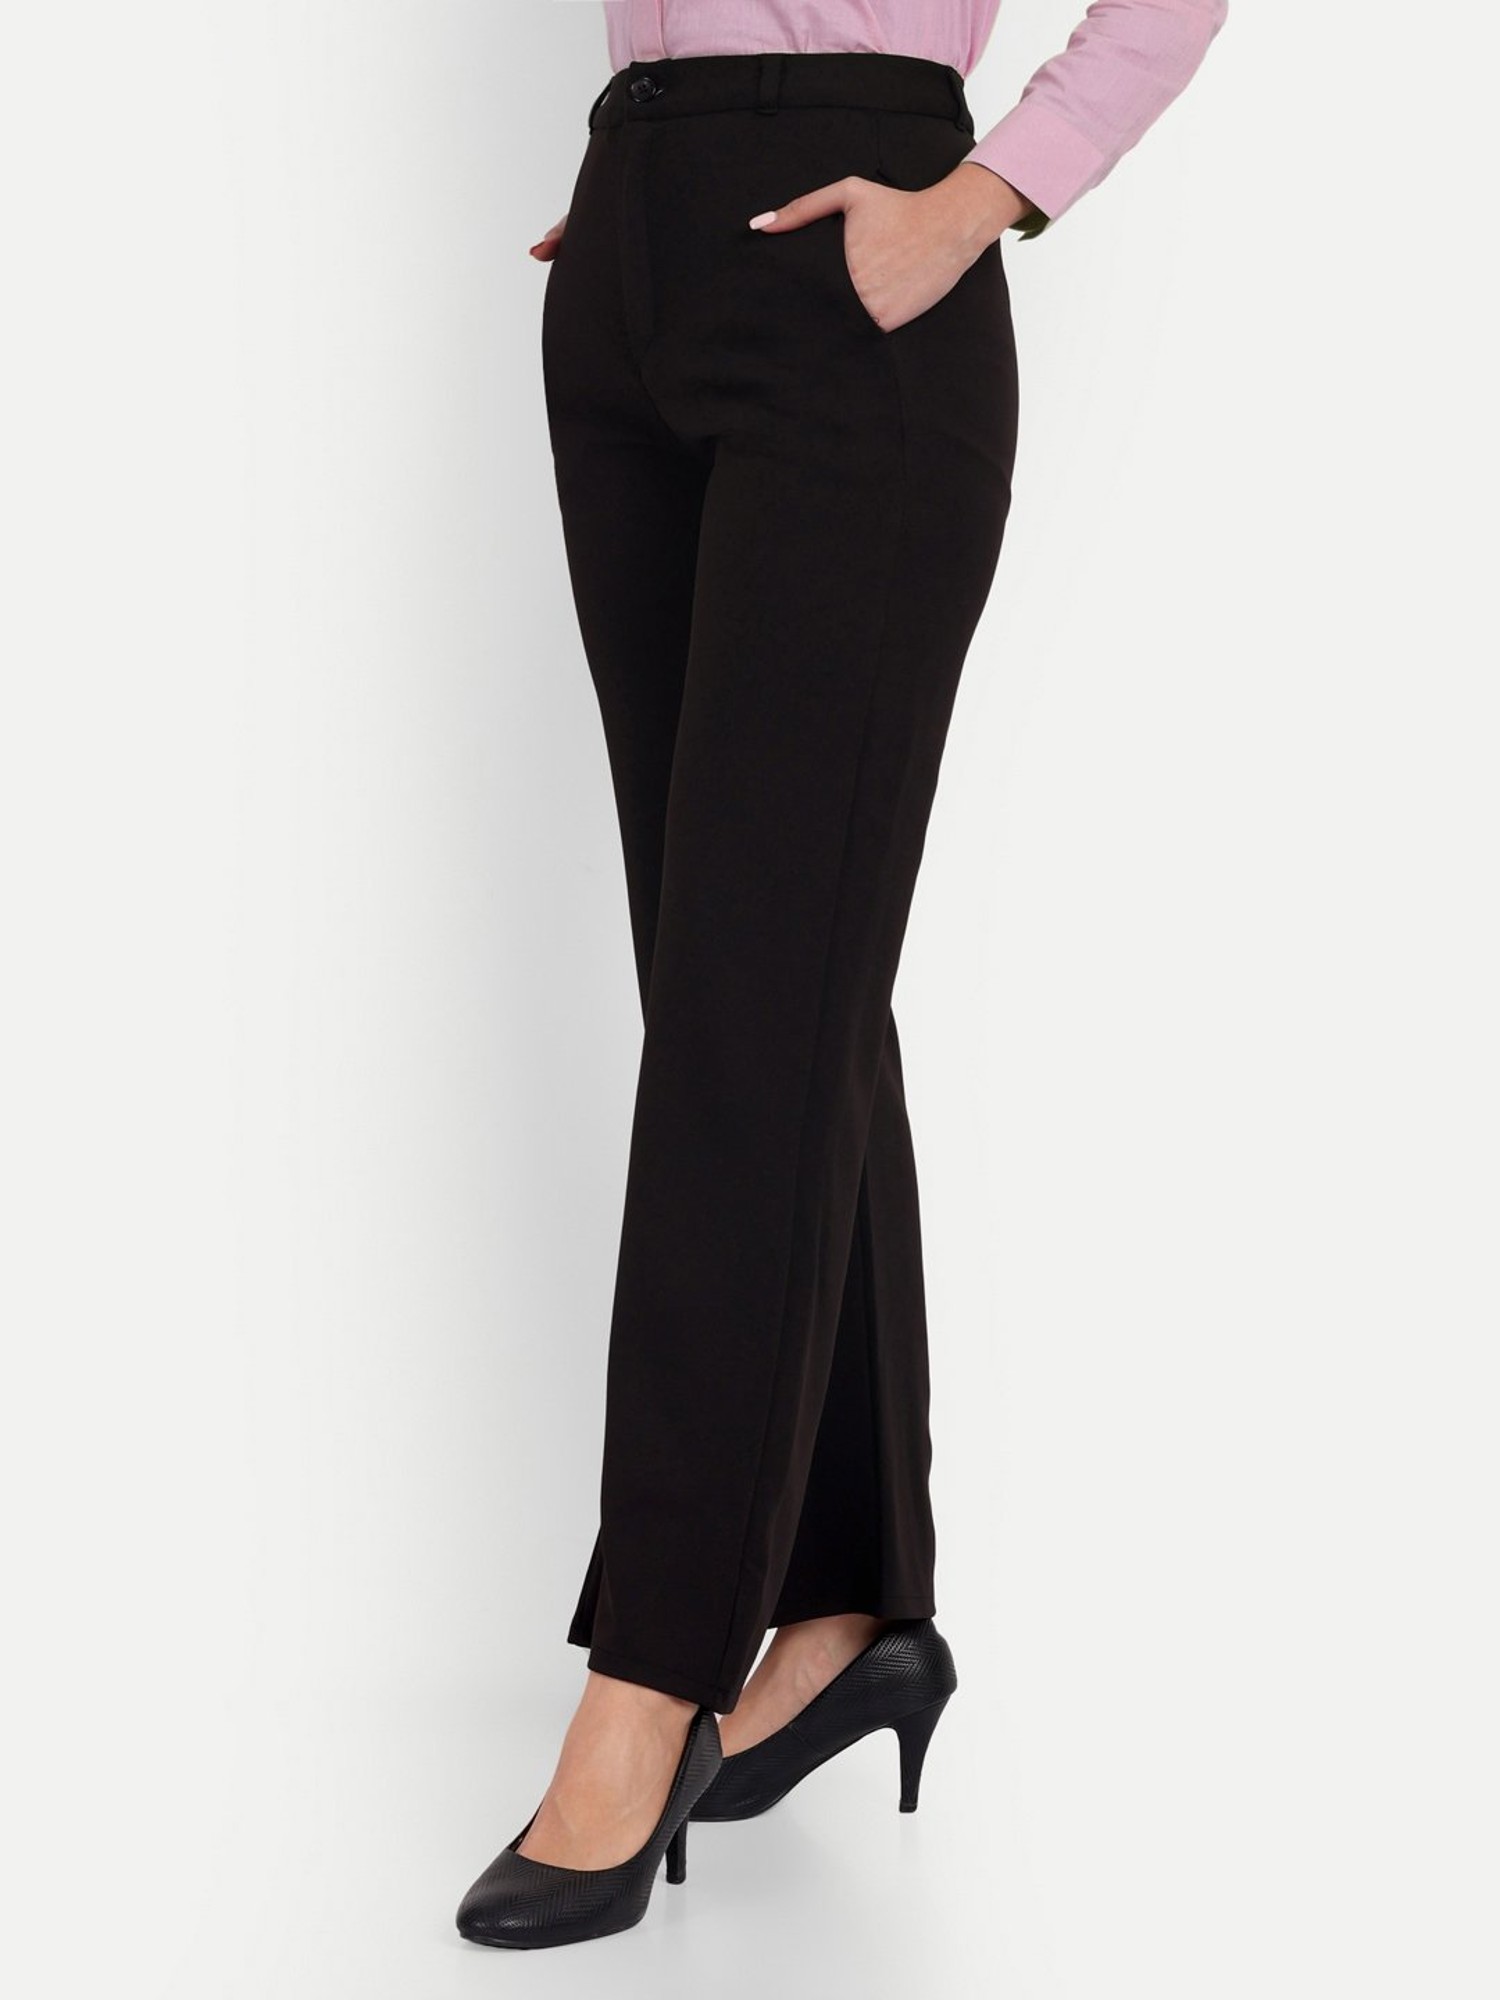 Broadway NYC Black Trousers & Womens black formal trousers | Wearitboutique-hangkhonggiare.com.vn